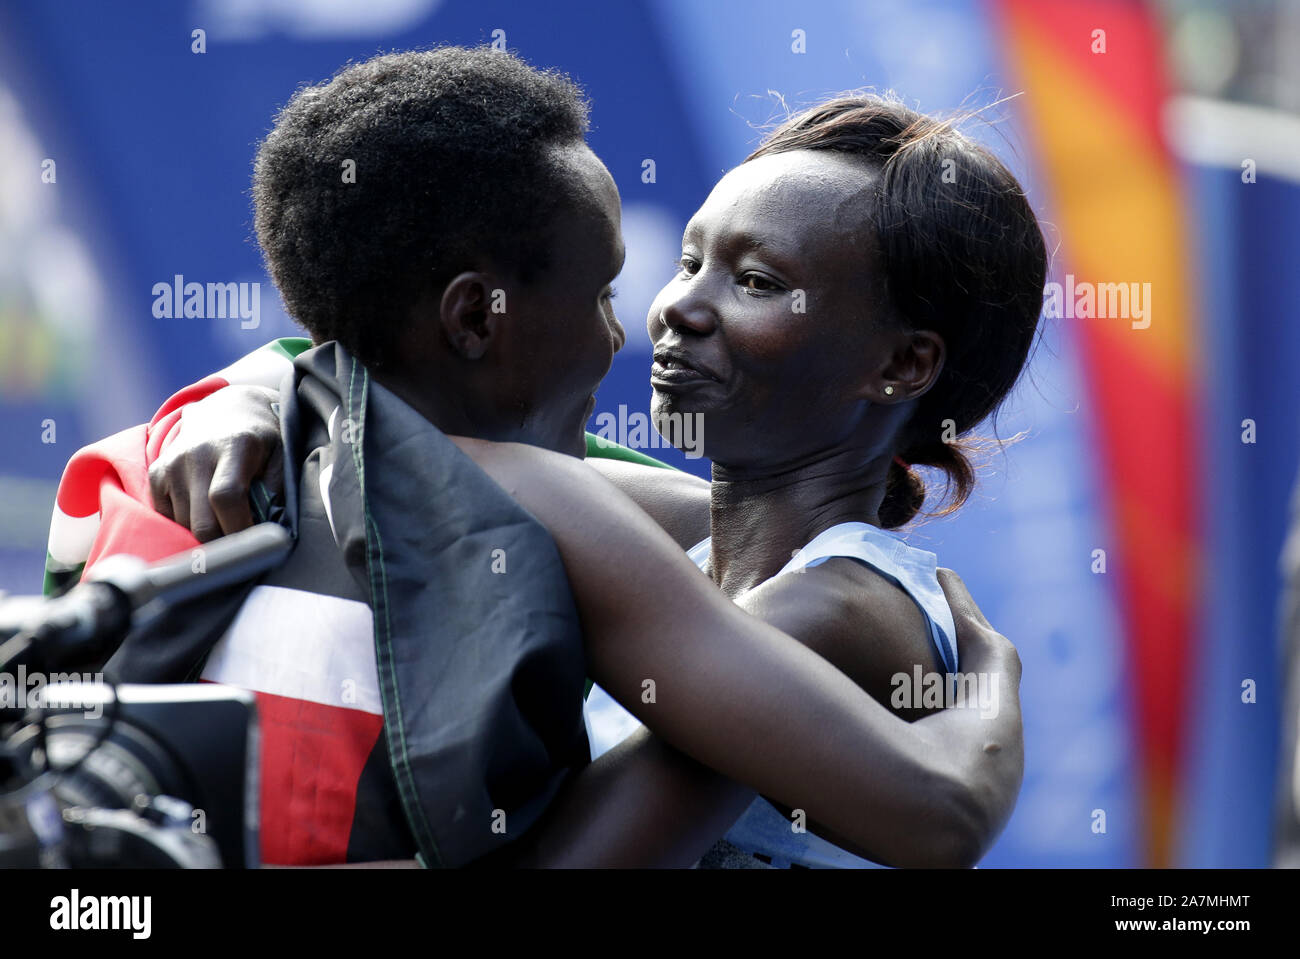 New York, United States. 03rd Nov, 2019. Joyciline Jepkosgei of Kenya hugs 2nd place finisher Mary Keitany after winning the Women's 2019 NYRR TCS New York City Marathon in New York City on Sunday, November 3, 2019. Over 50,000 runners from New York City and around the world will race through the five boroughs on a course that winds its way from the Verrazano Bridge before crossing the finish line by Tavern on the Green in Central Park. Photo by John Angelillo/UPI Credit: UPI/Alamy Live News Stock Photo